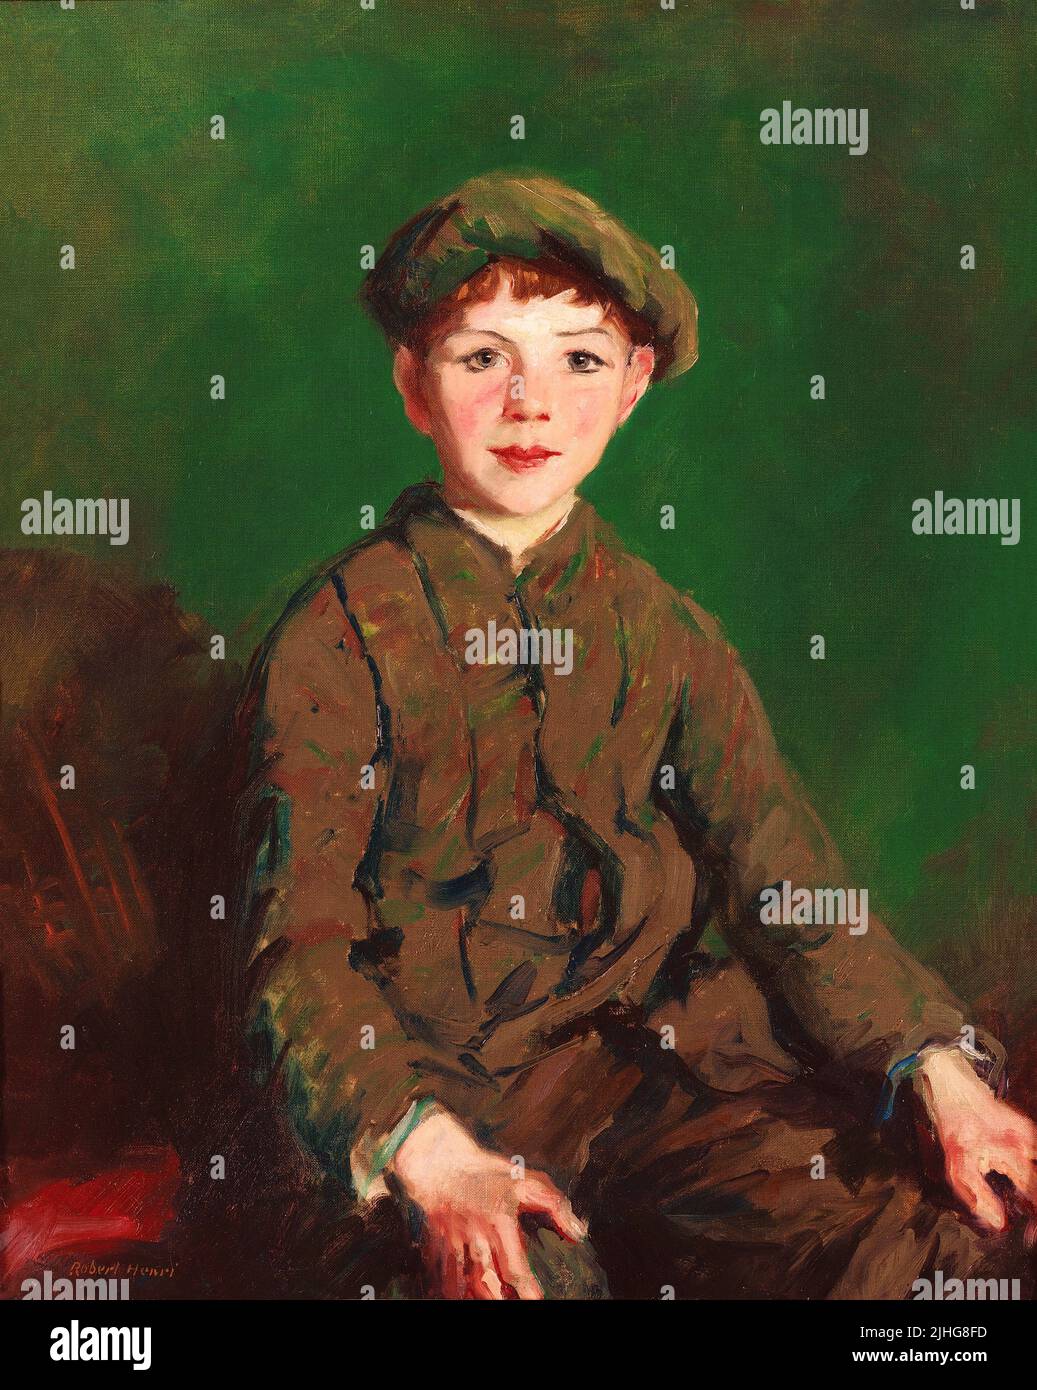 An Irish lad (1913) by Robert Henri (1865 -1929), an American painter and teacher. As a young man, he studied in Paris, where he identified strongly with the Impressionists. Stock Photo